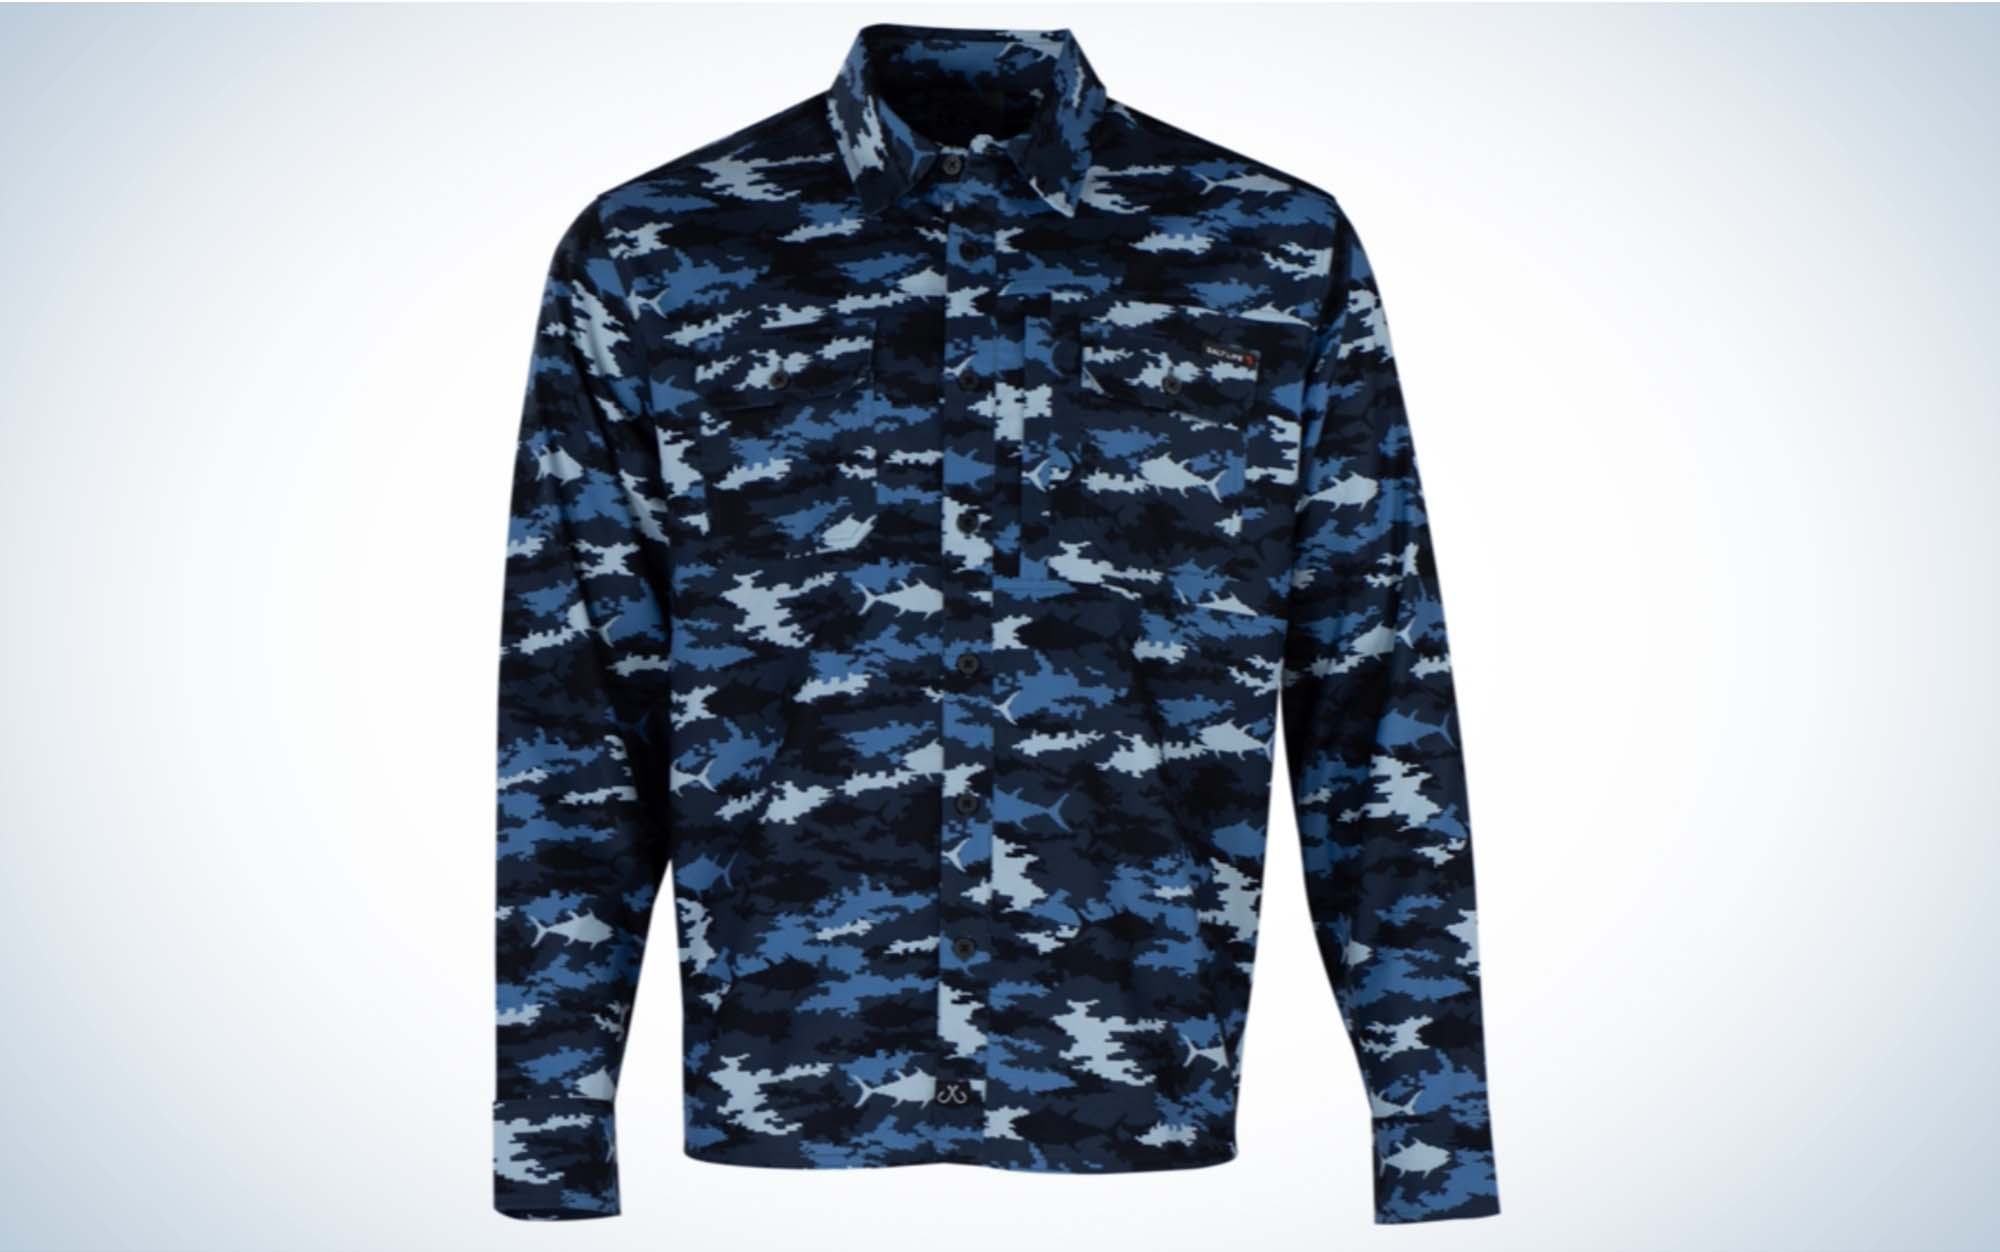 Comparing Best Fishing Shirts for Men